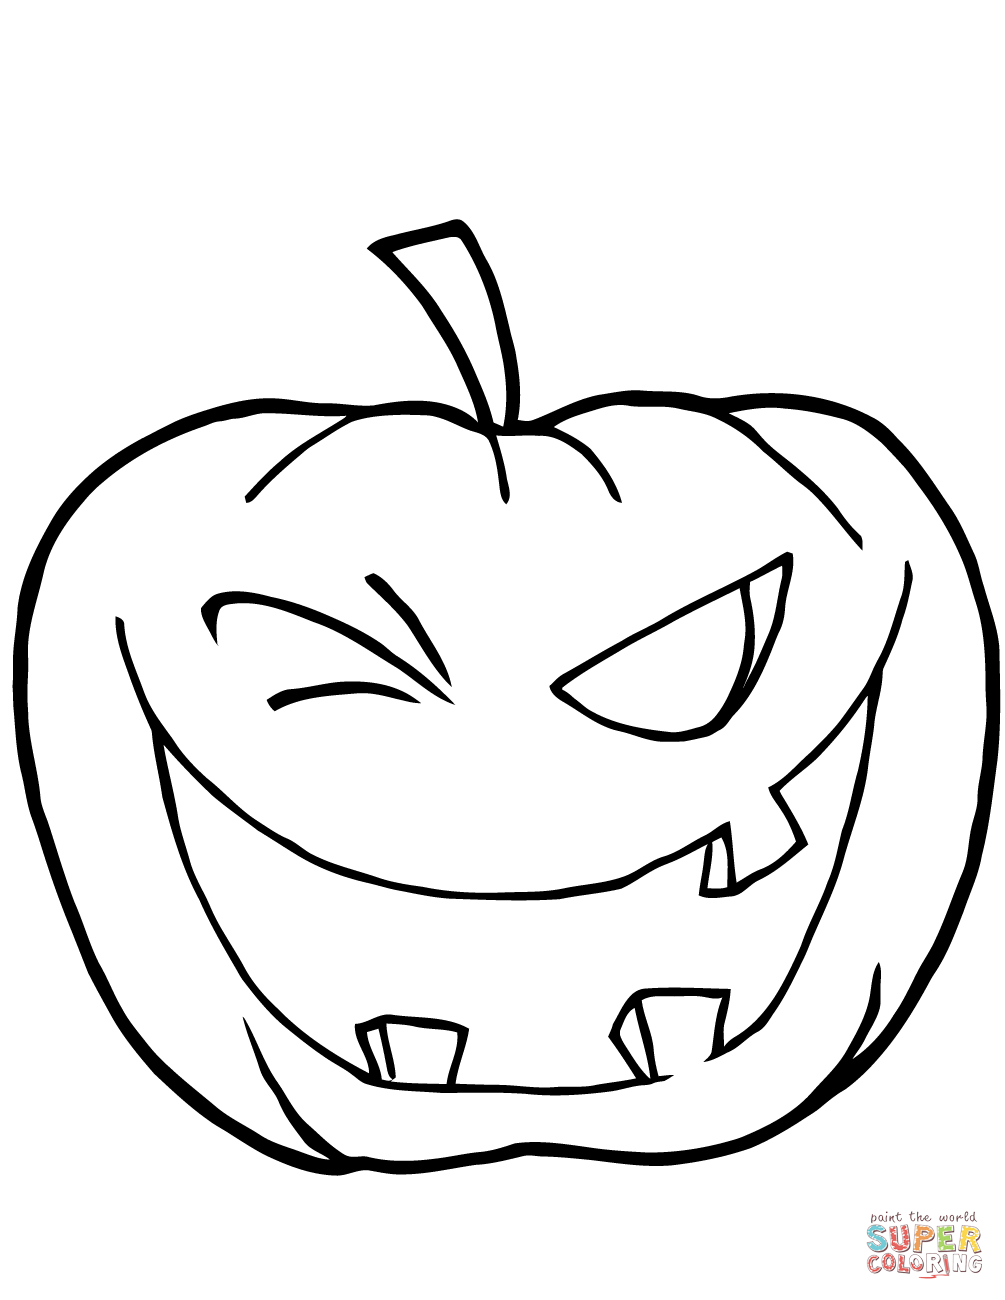 Halloween pumpkin winking coloring page free printable coloring pages